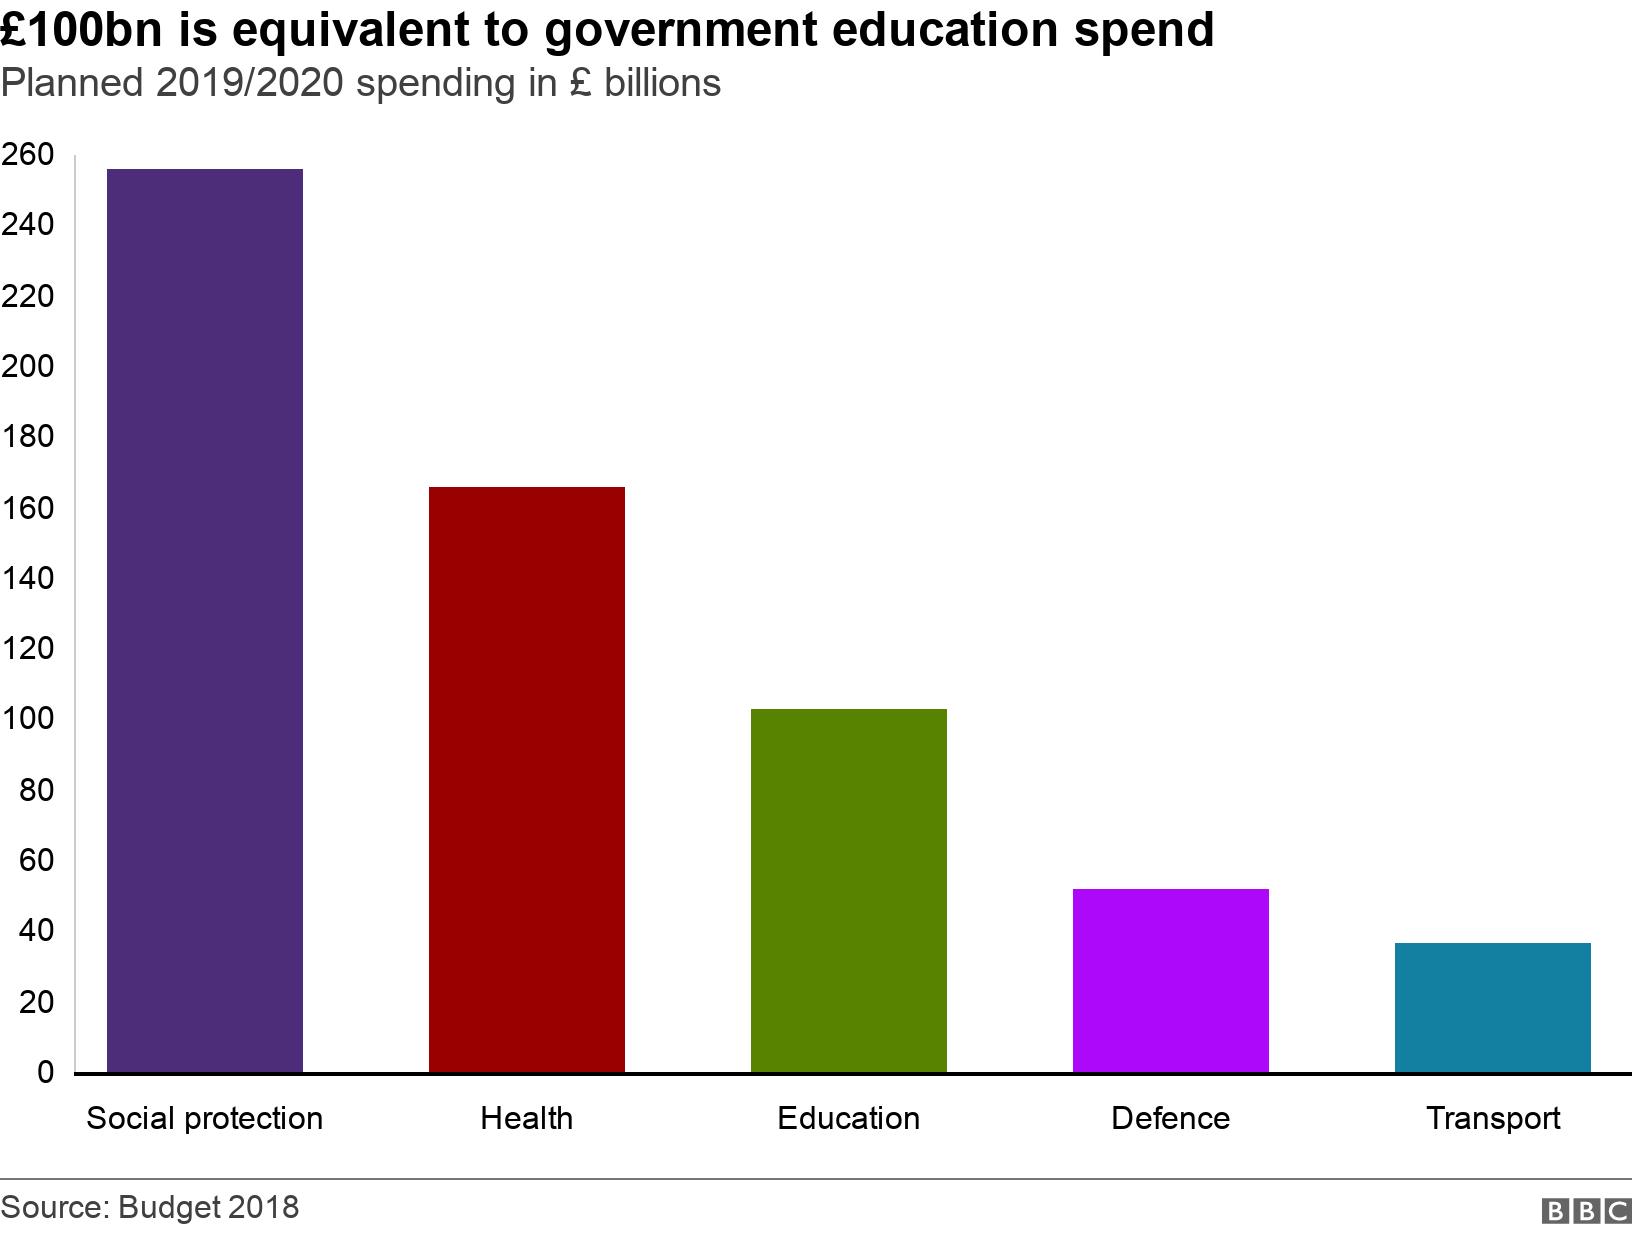 £100bn is equivalent to government education spend. Planned 2019/2020 spending in £ billions. Bar chart showing planning spending in different areas for 2019/20 .